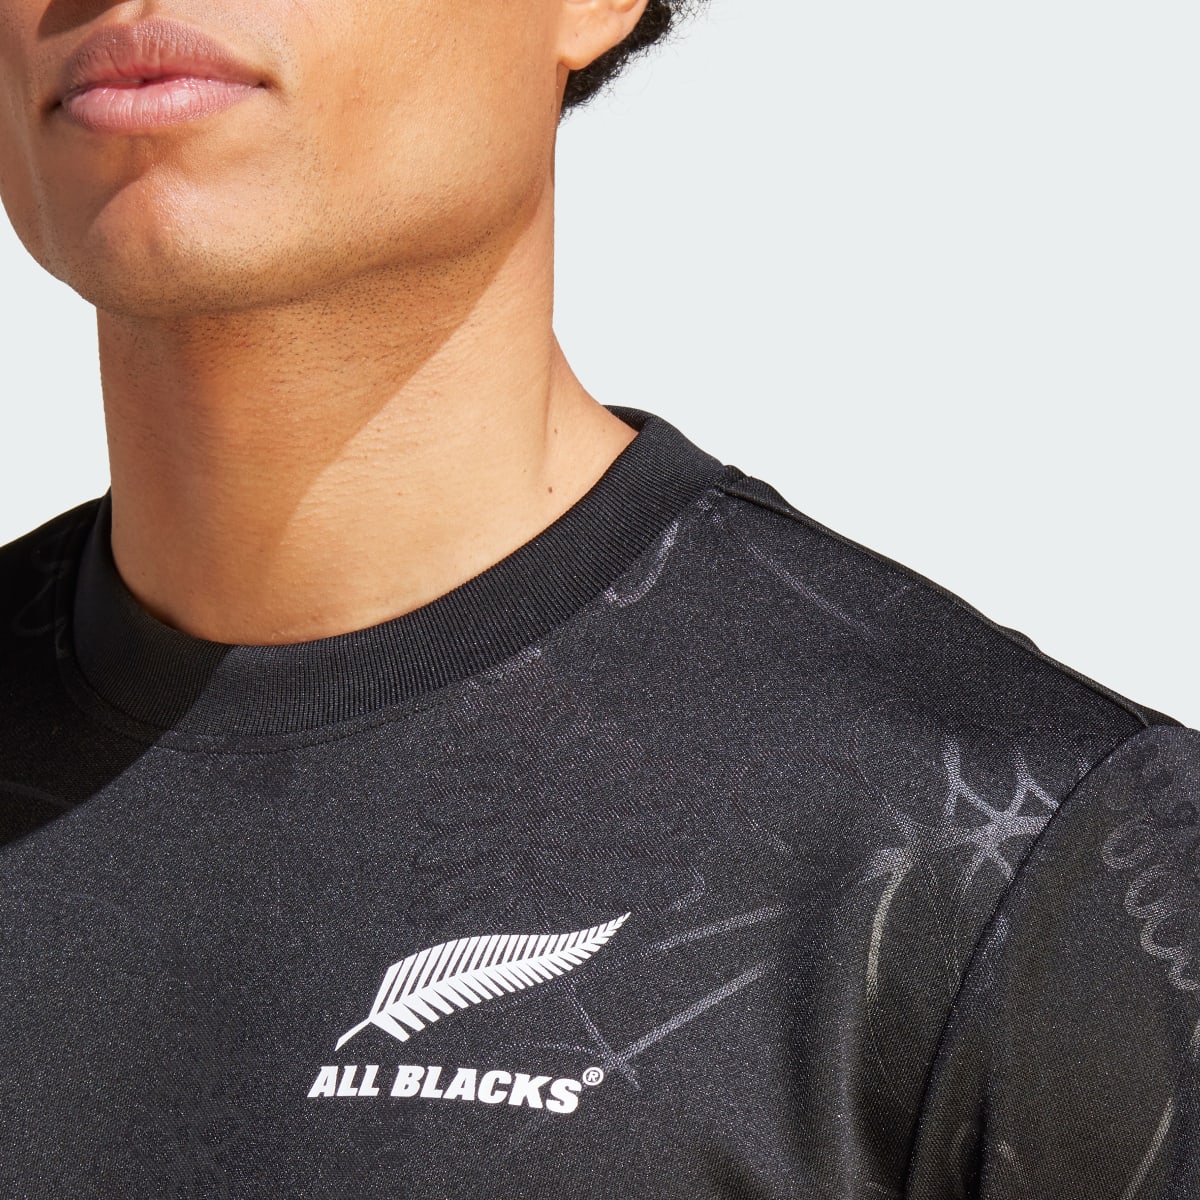 Adidas All Blacks Rugby Supporters T-Shirt. 7